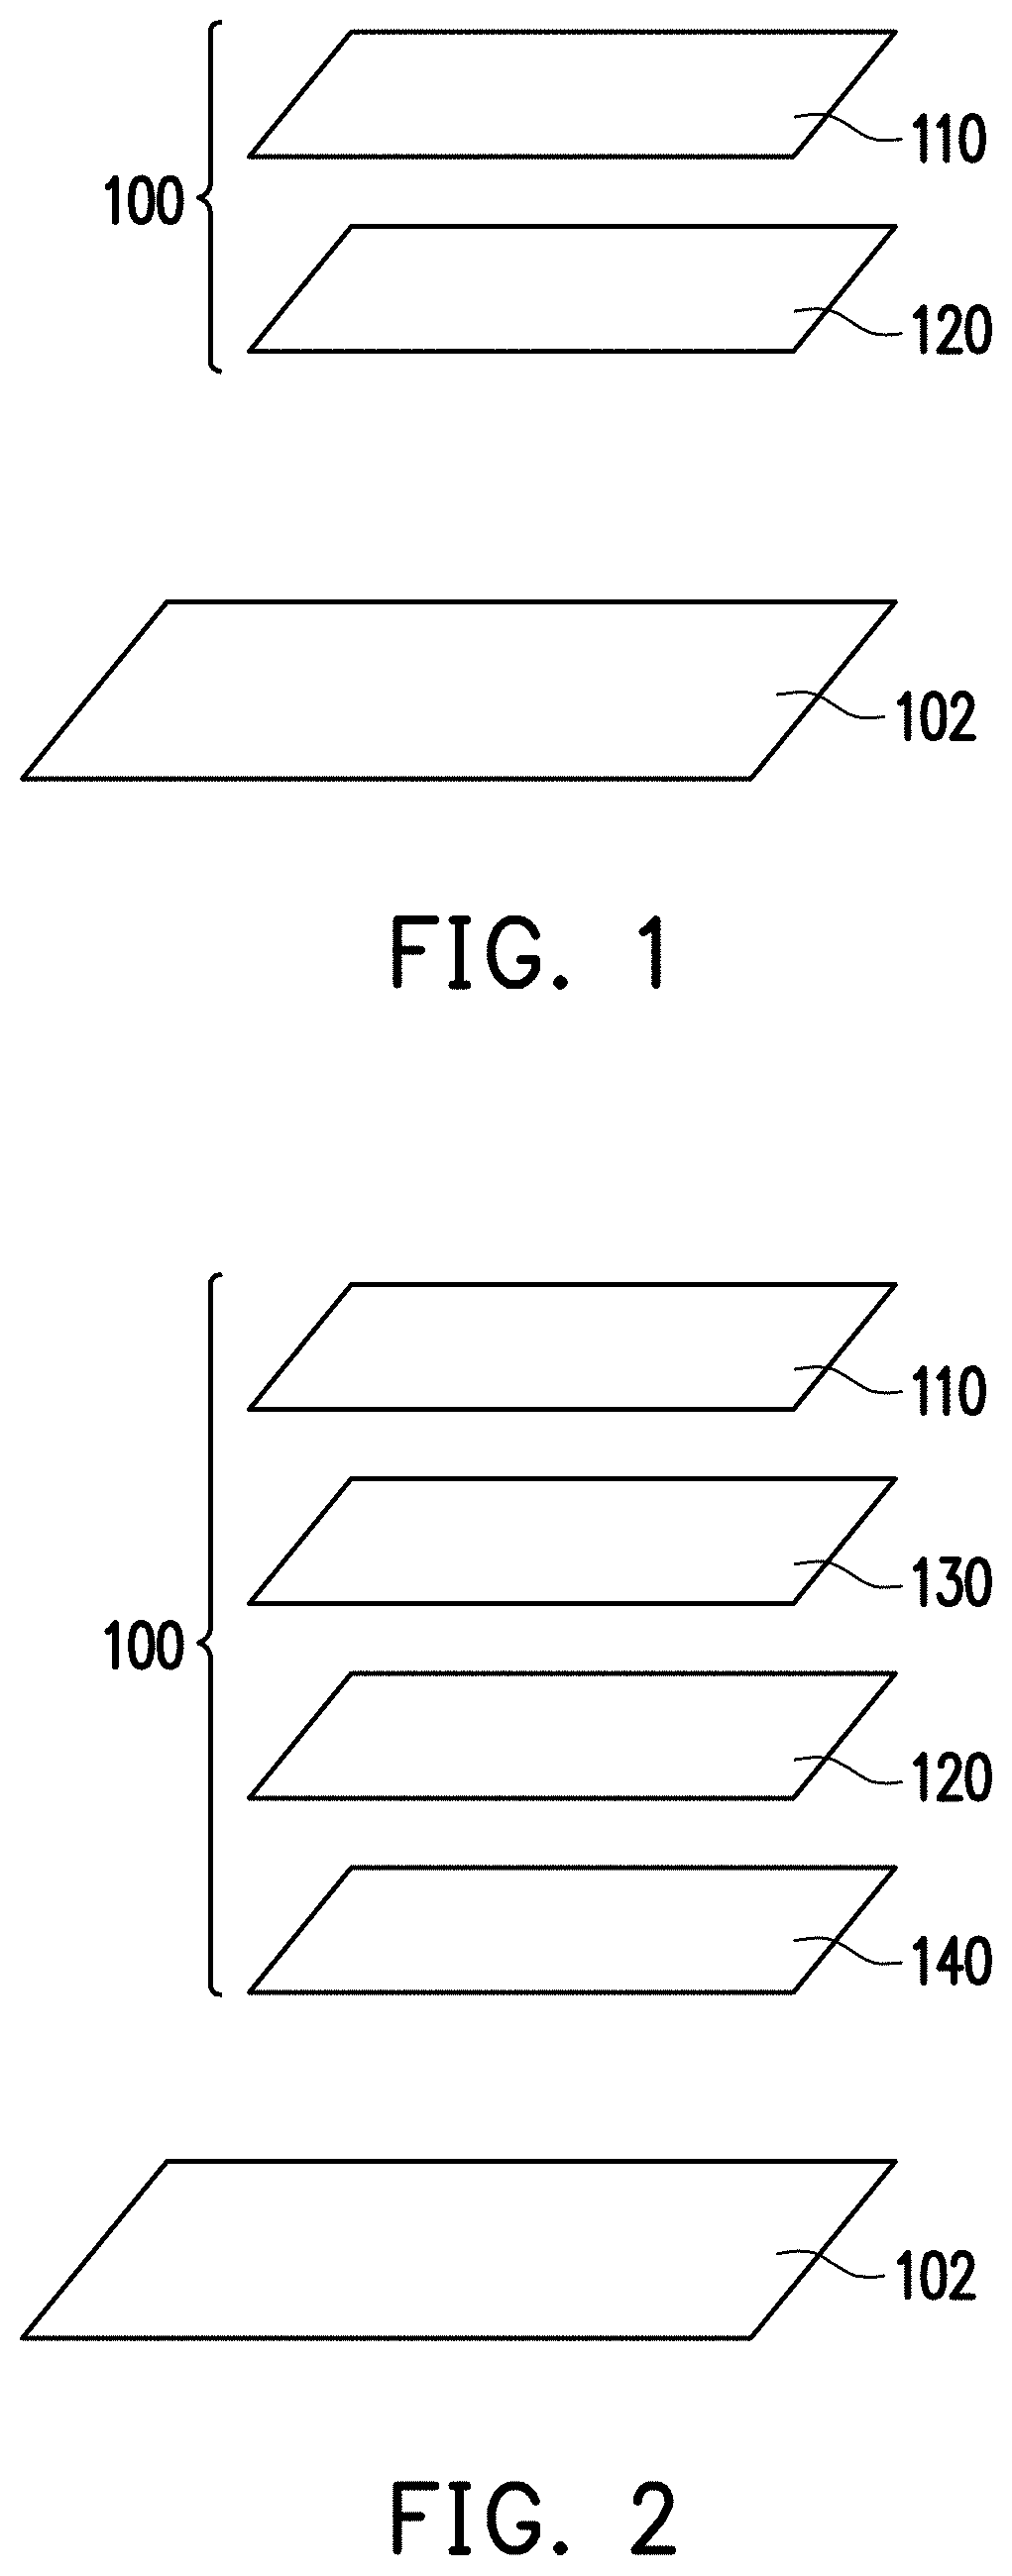 Transfer printing paper and manufacturing method of smart fabric